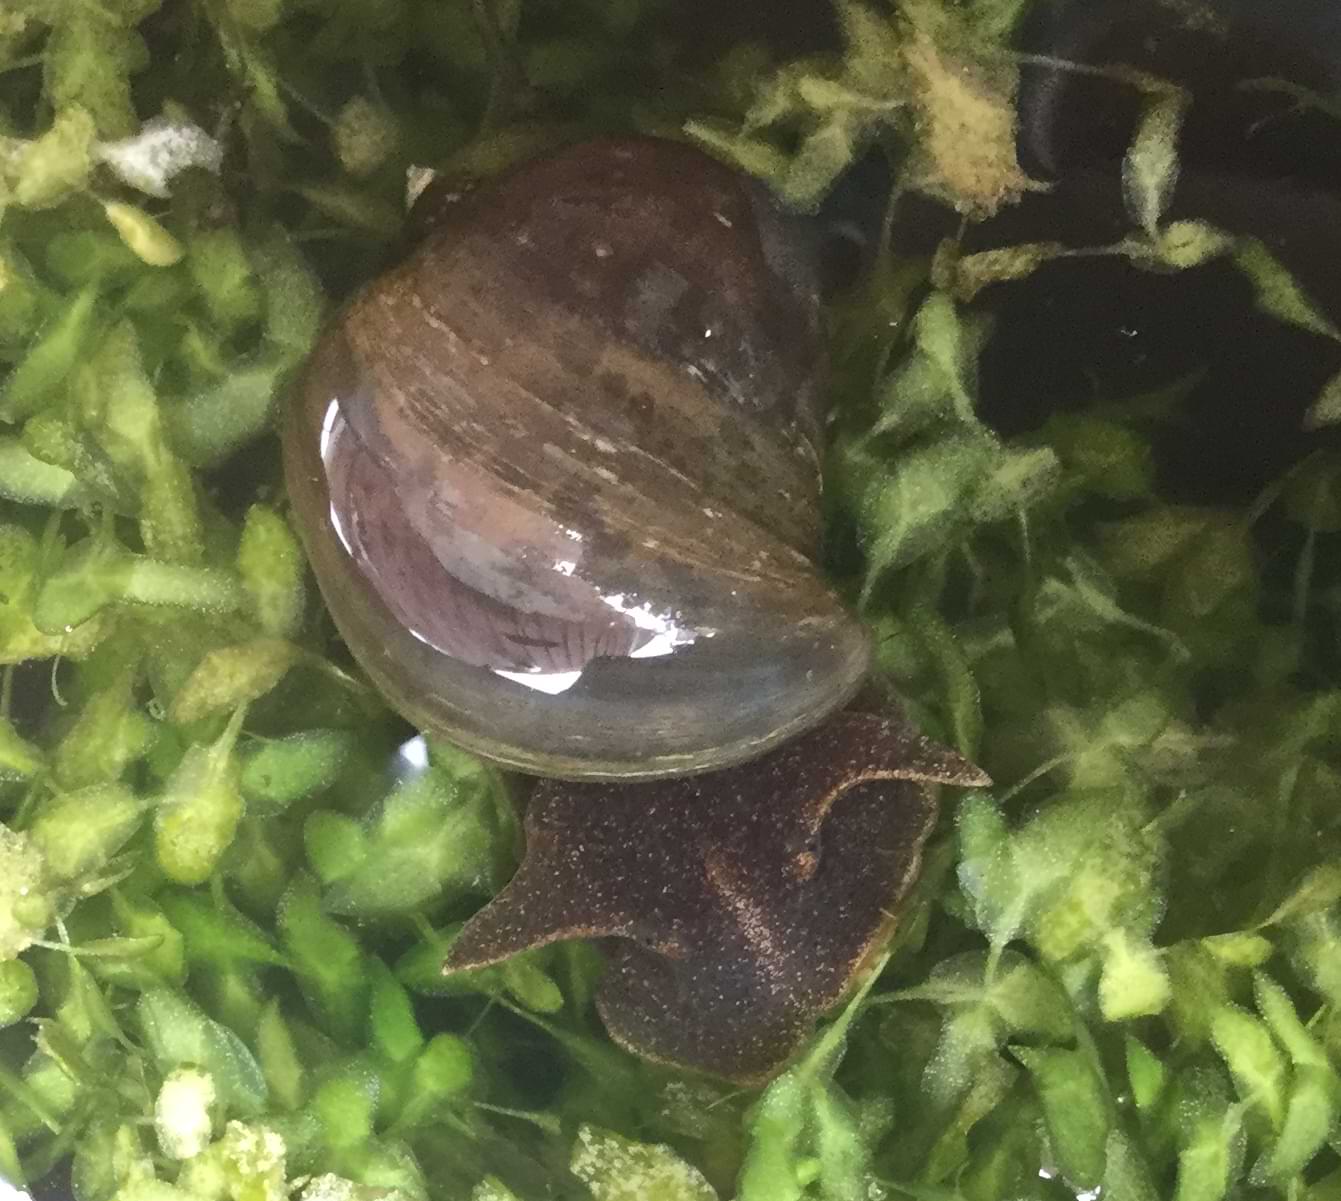 Another snail with a rounder shell that has a small blunt spiral at the end. These snails have two long tentacles at the top of their heads which vaguely look like bunny ears. At the base of these tentacles are two small dots which are the snail's eyes.